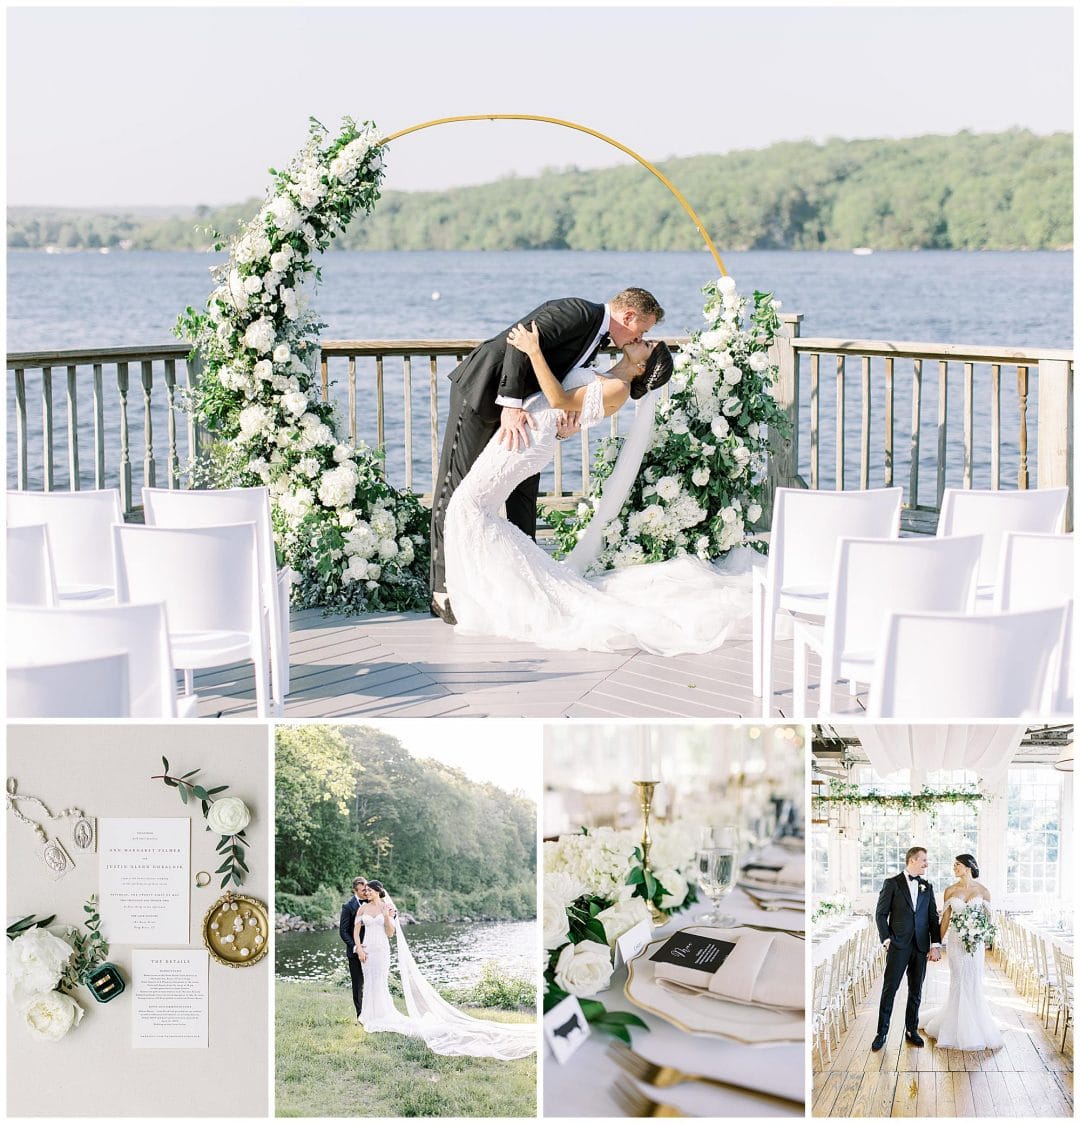 A Chic & Timeless Wedding at The Lace Factory - Krista Jean